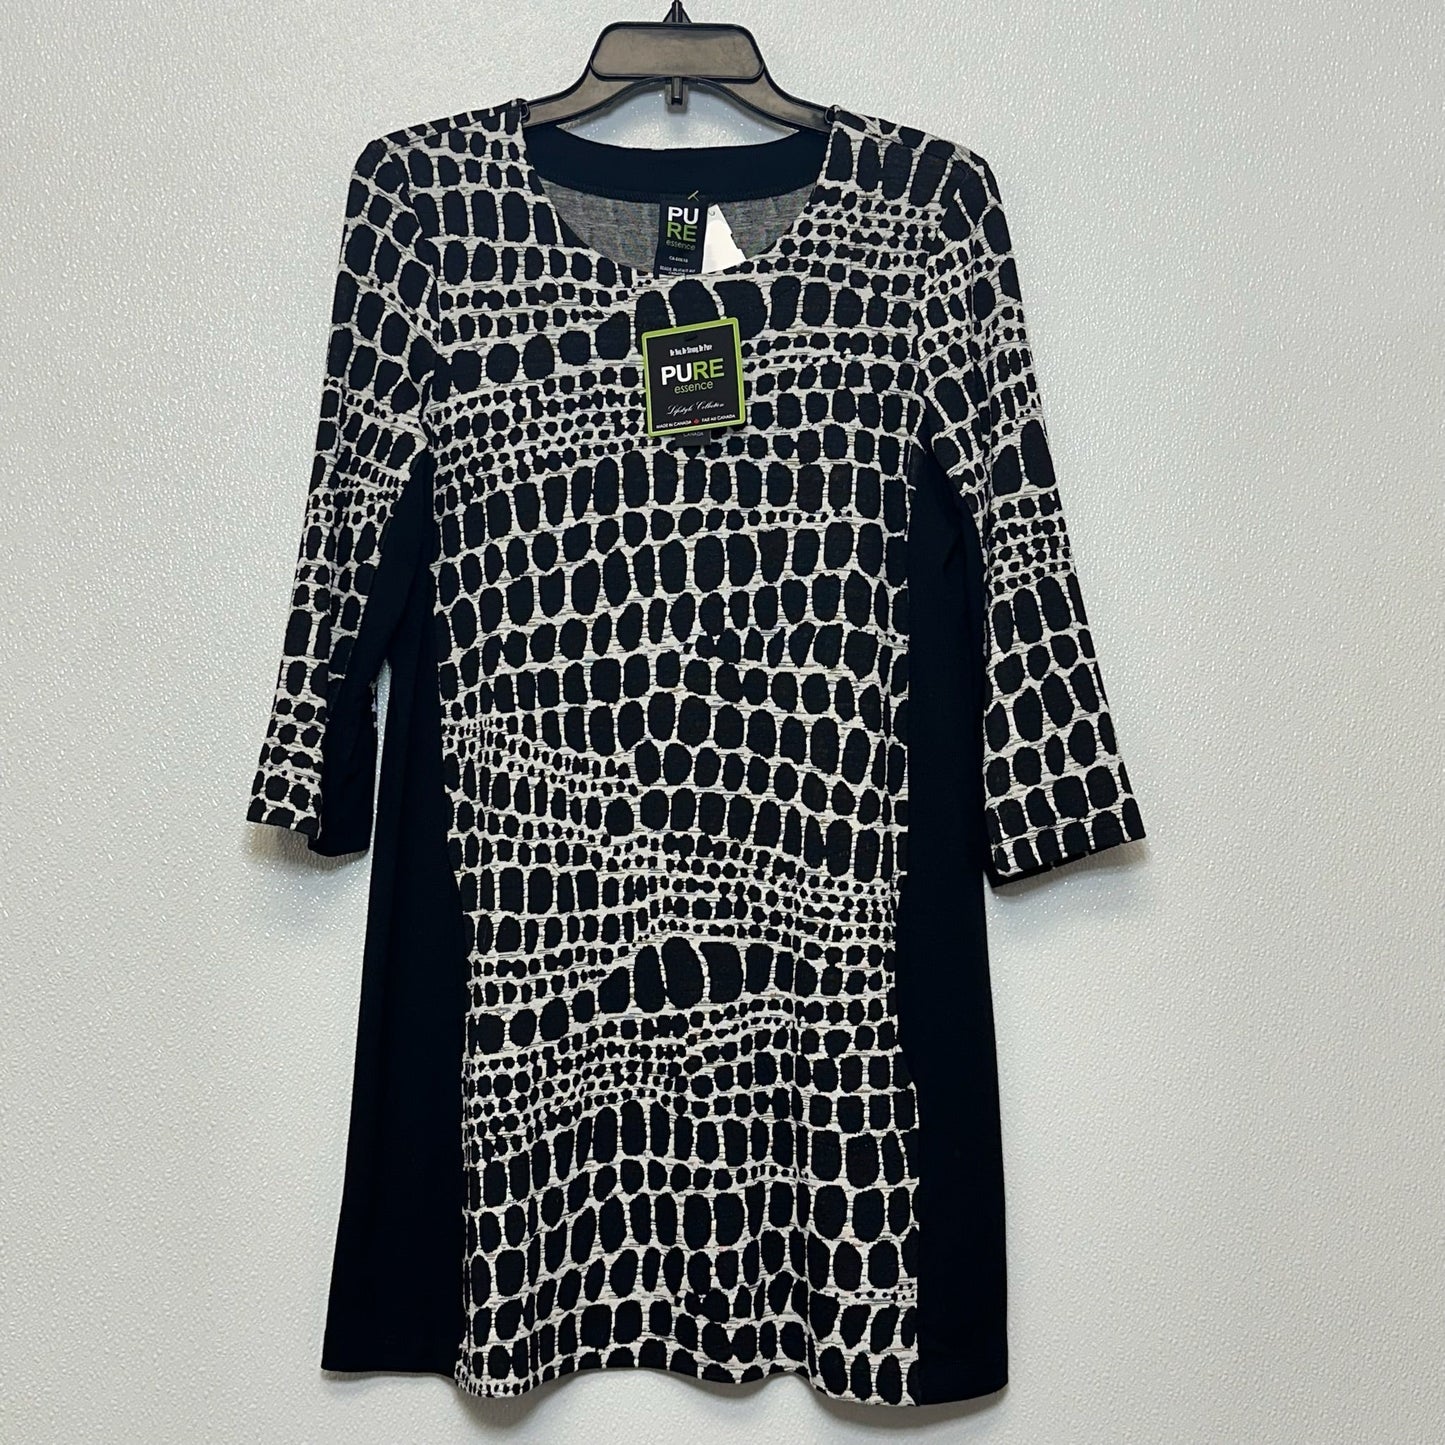 Dress Casual Short By Clothes Mentor  Size: M